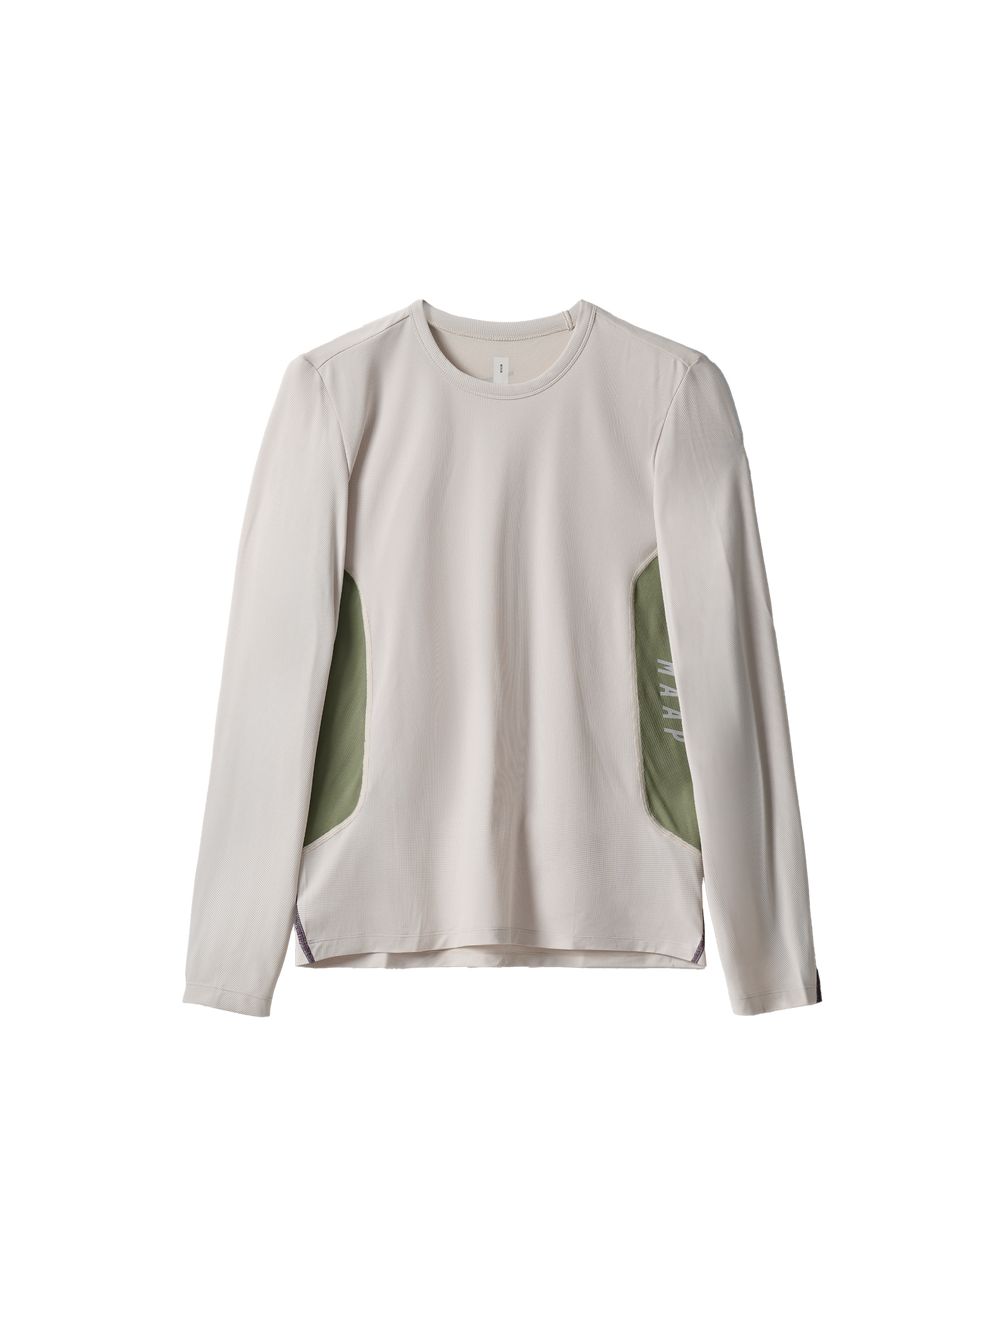 Product Image for Women's Alt_Road Tech LS Tee